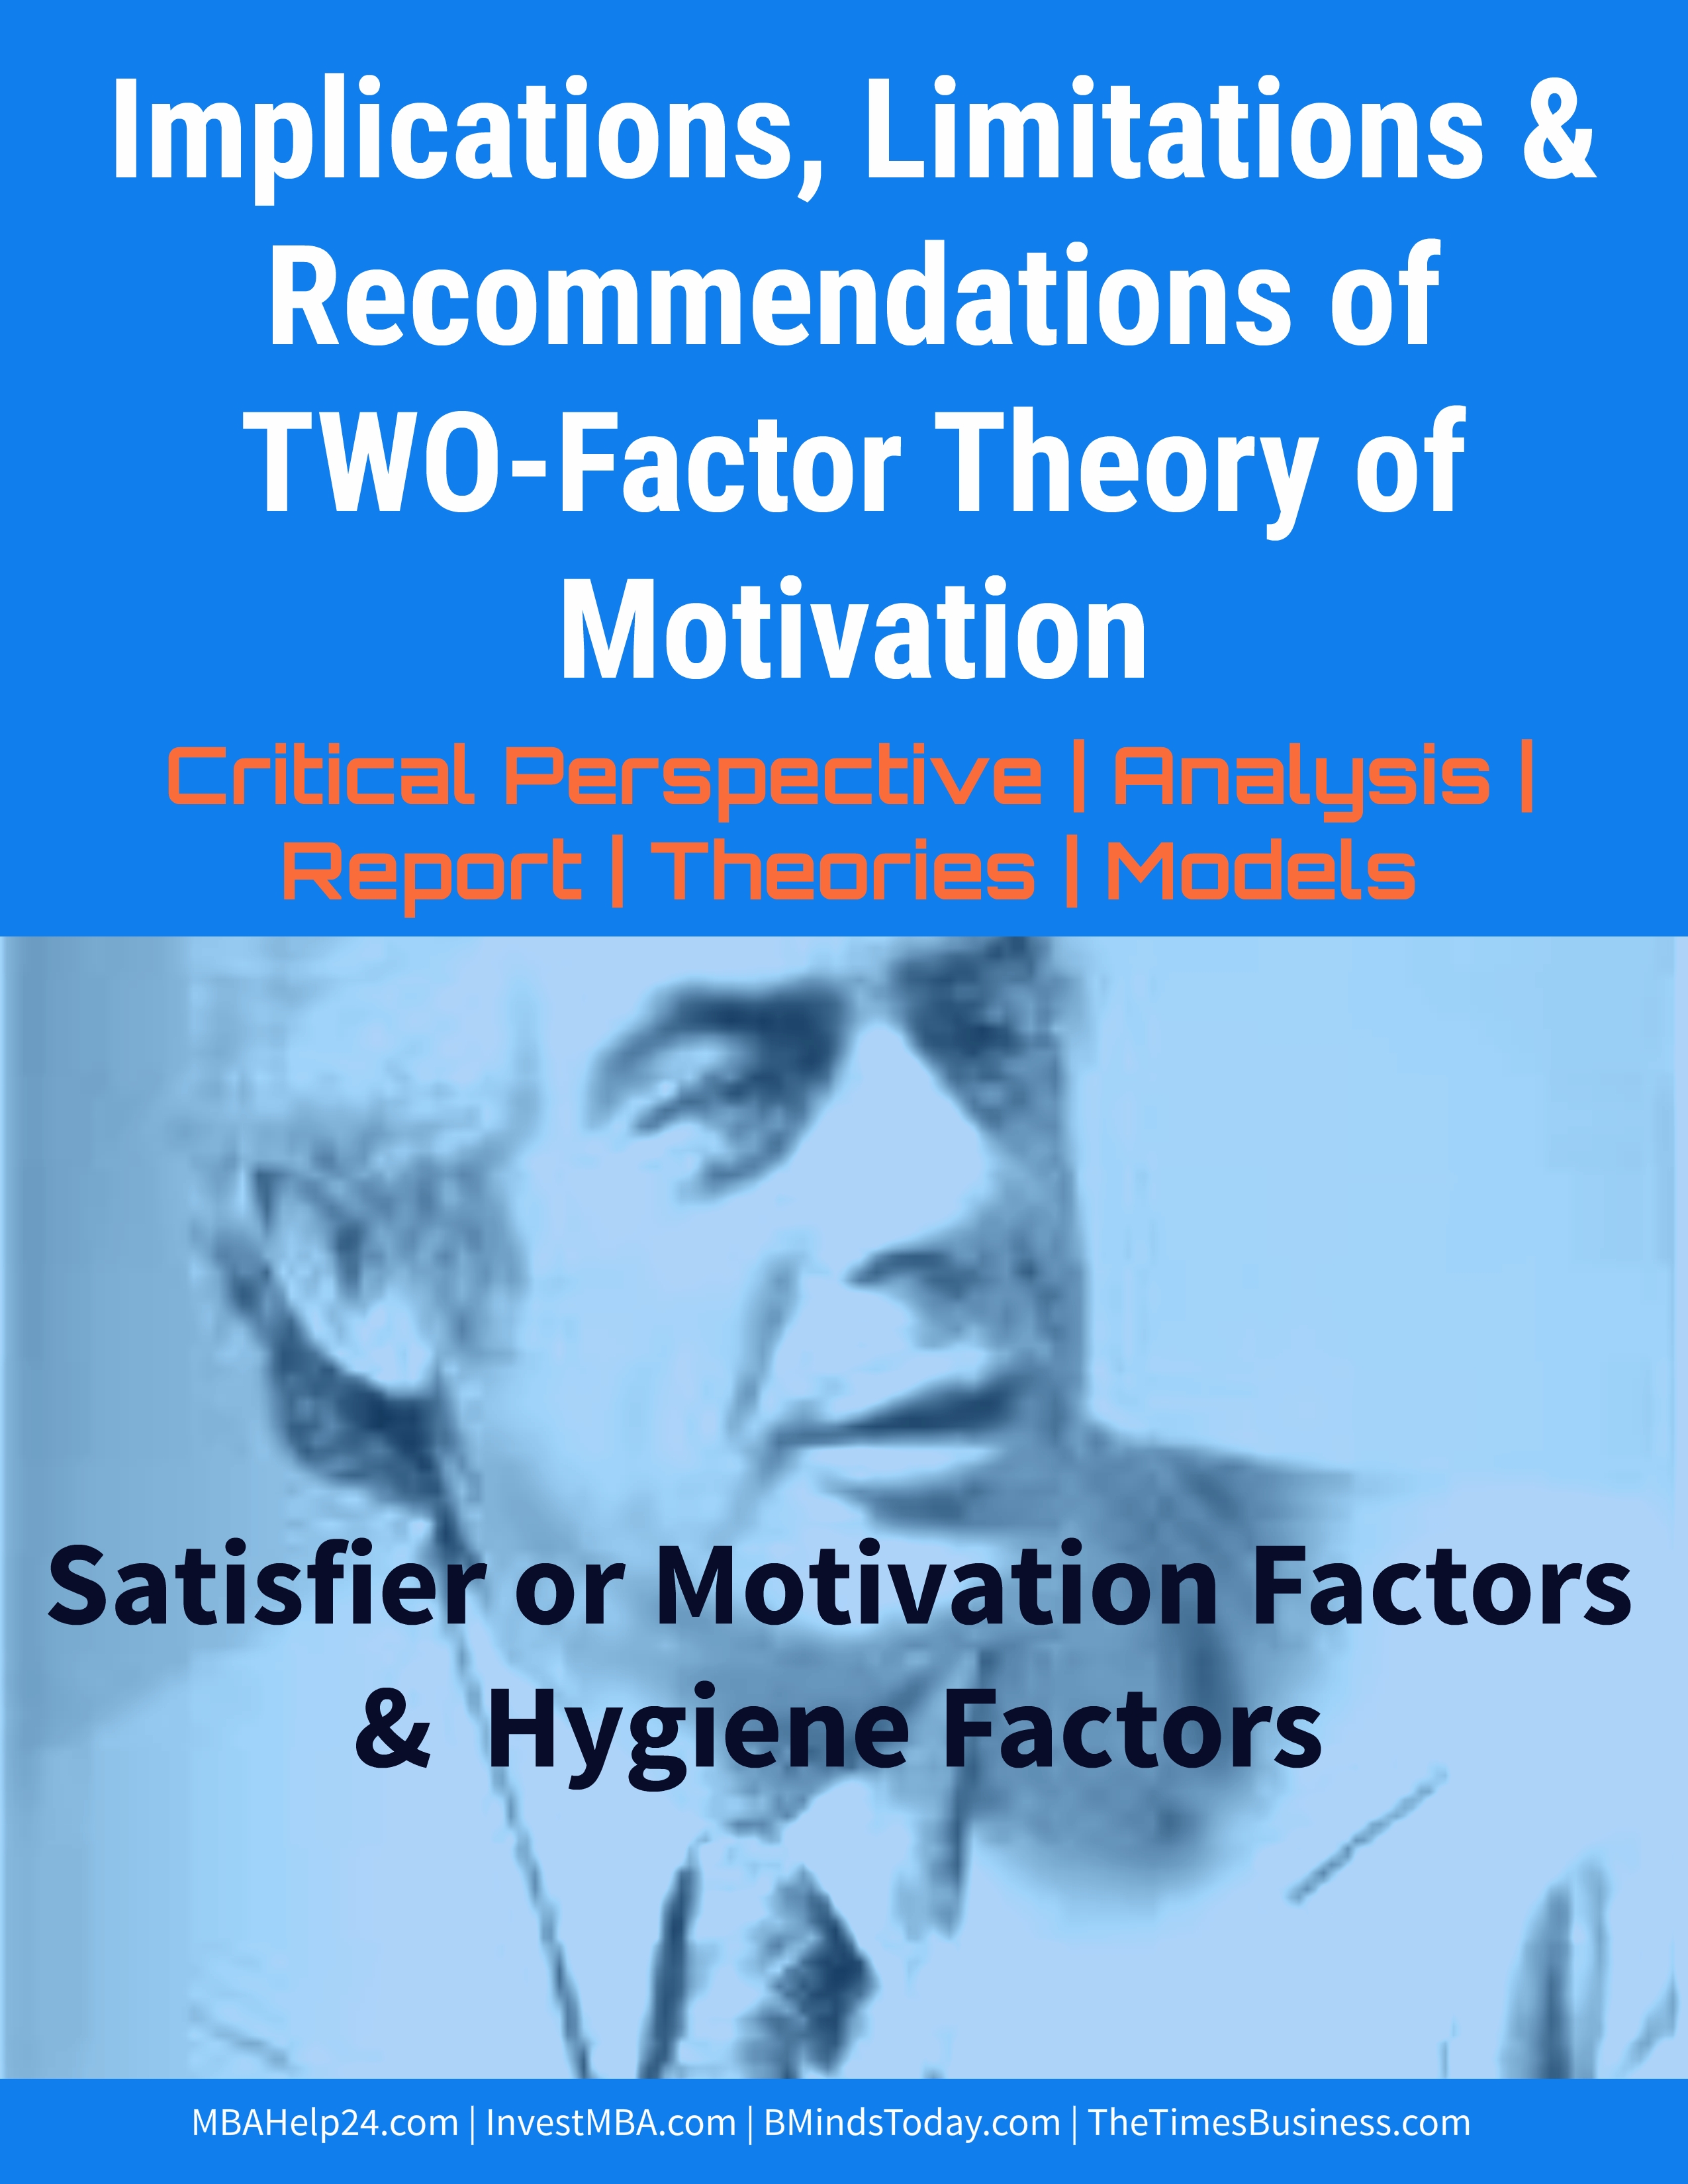 Implications, Limitations & Recommendations of TWO-Factor Theory of Motivation motivation Implications, Limitations &#038; Suggestions of TWO-Factor Theory of Motivation Two factor theory of motivation limtations implications, limitations of two-factor theory of motivation Implications, Limitations of TWO-Factor Theory of Motivation Two factor theory of motivation limtations